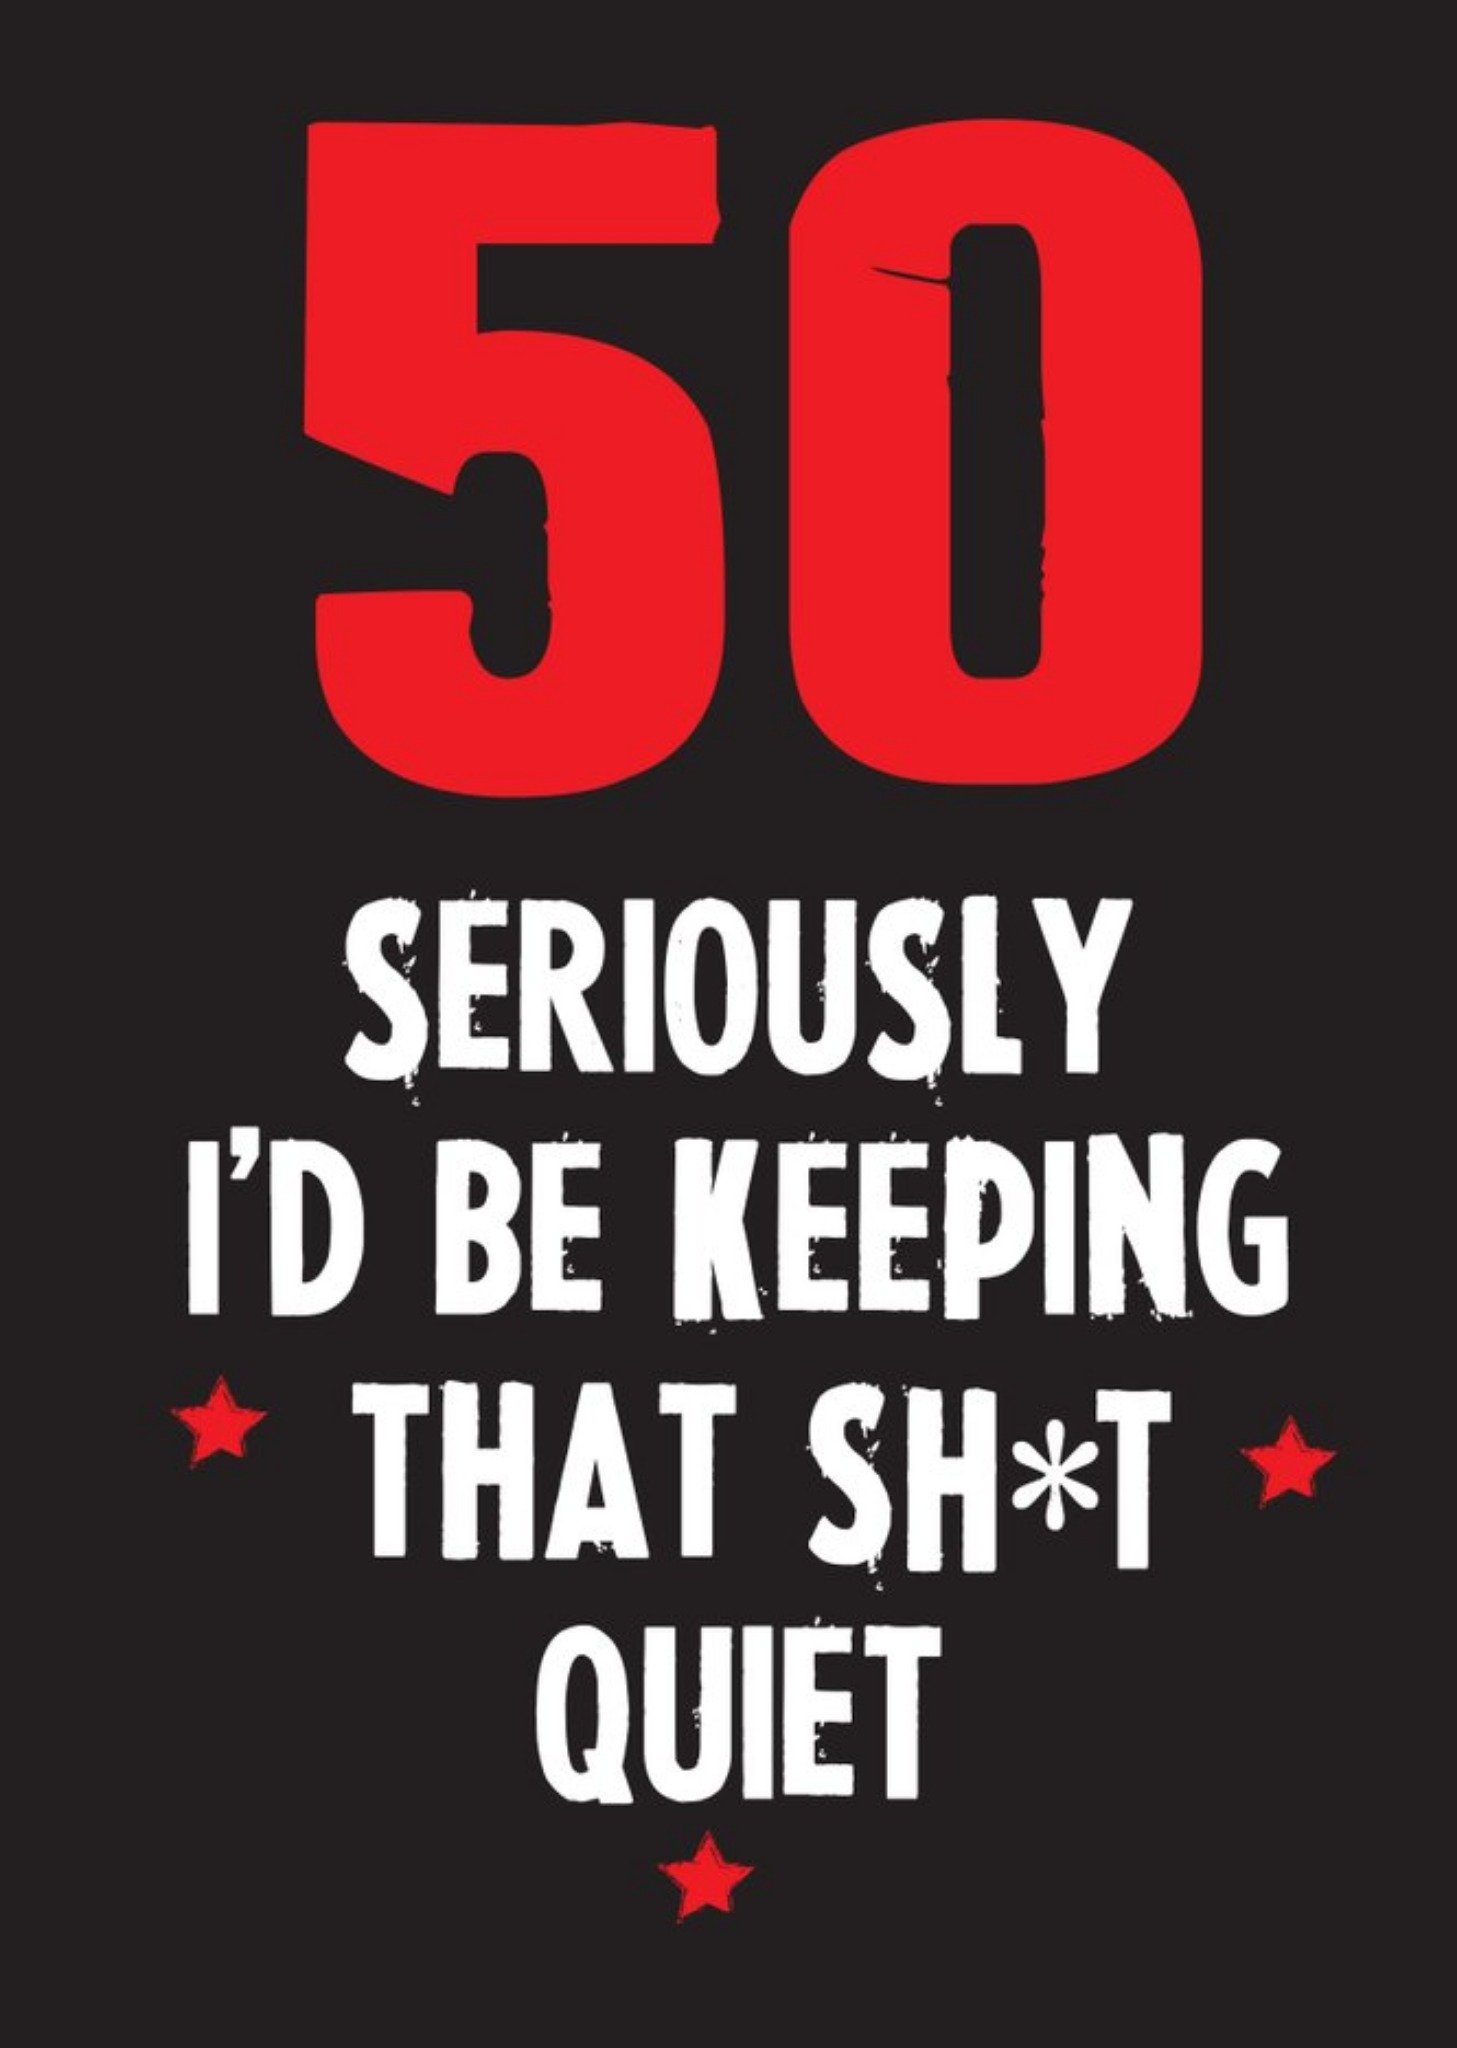 Moonpig Funny Cheeky Chops 50 Seriously Id Be Keeping That Quiet Card, Large